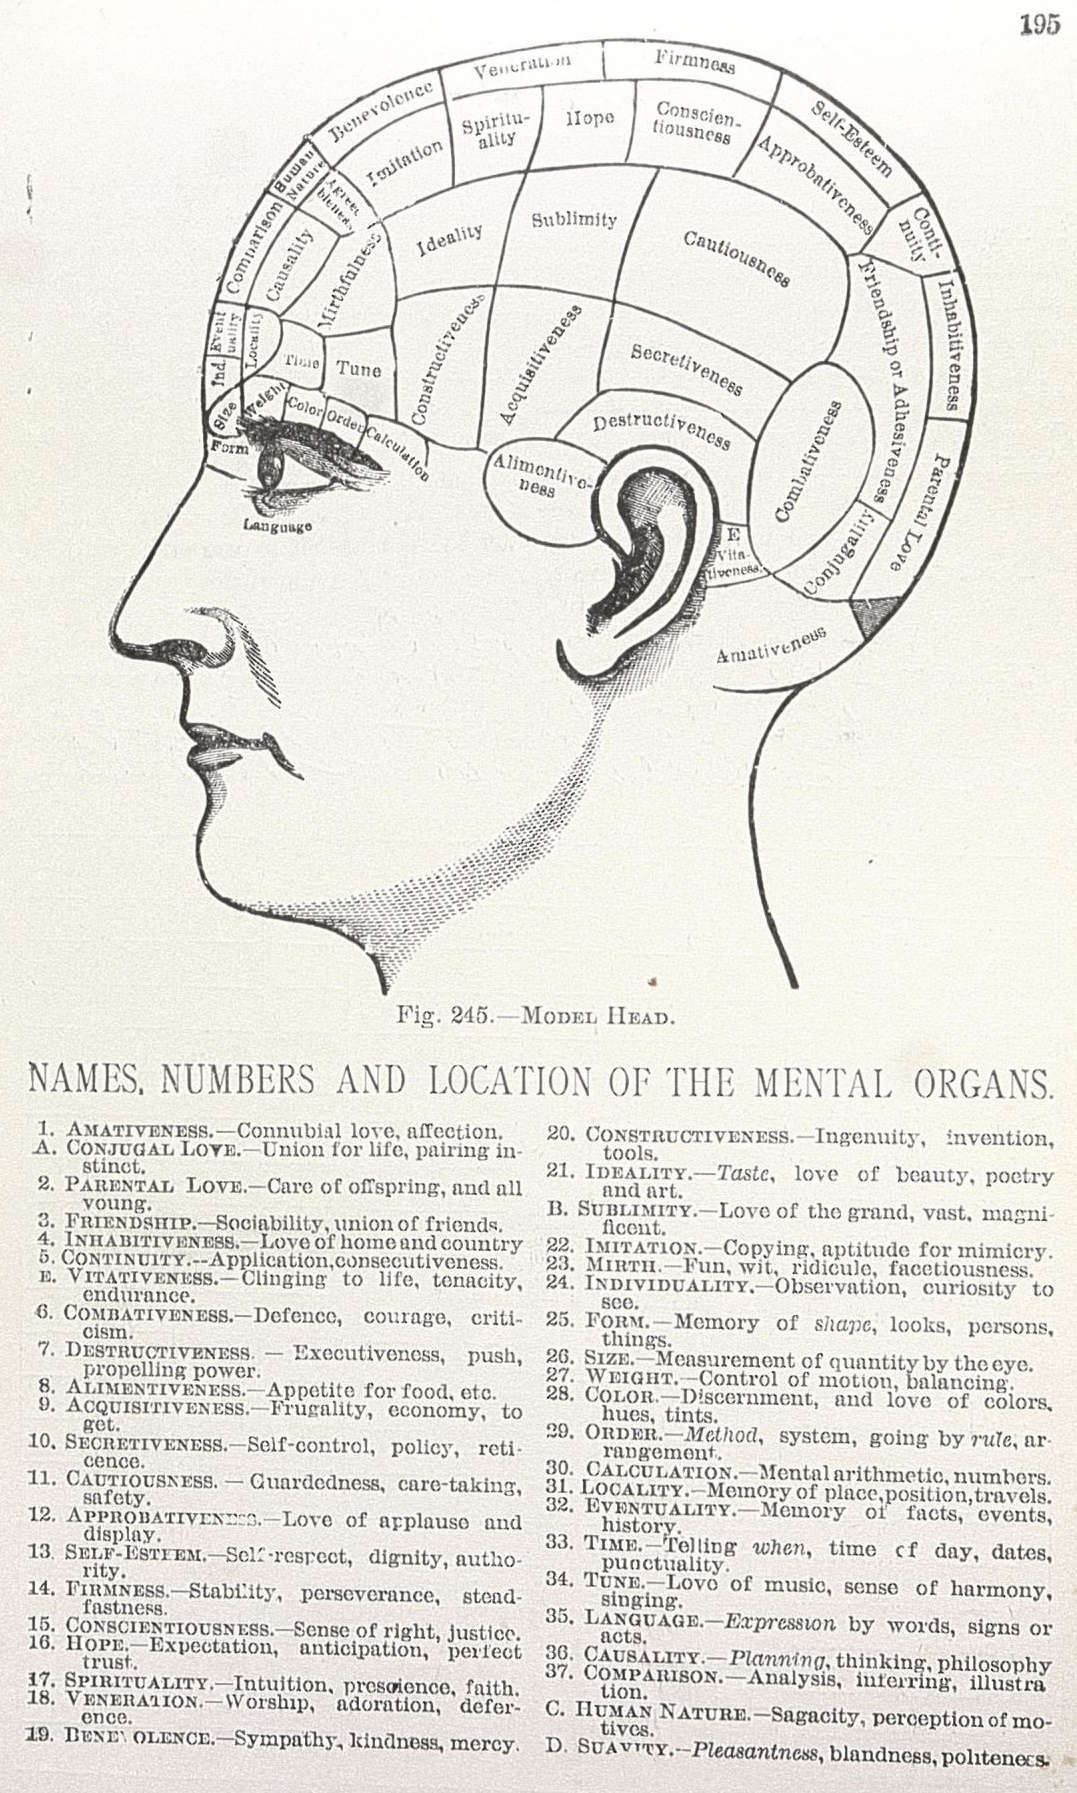 Outline of a human head showing the locations of the mental organs. Below the head are brief descriptions of each mental organ. 